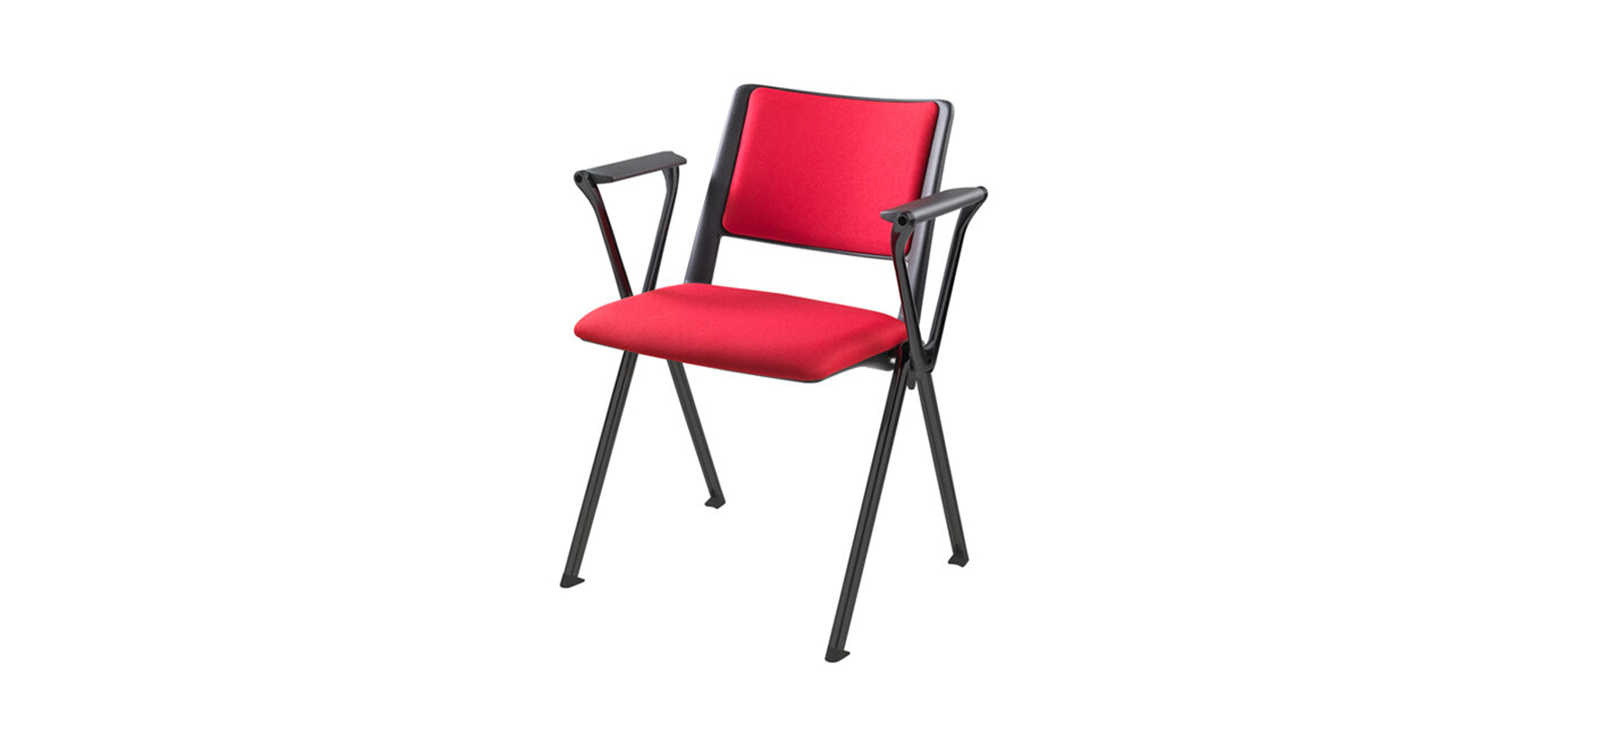 Mobby Sleeved Chair